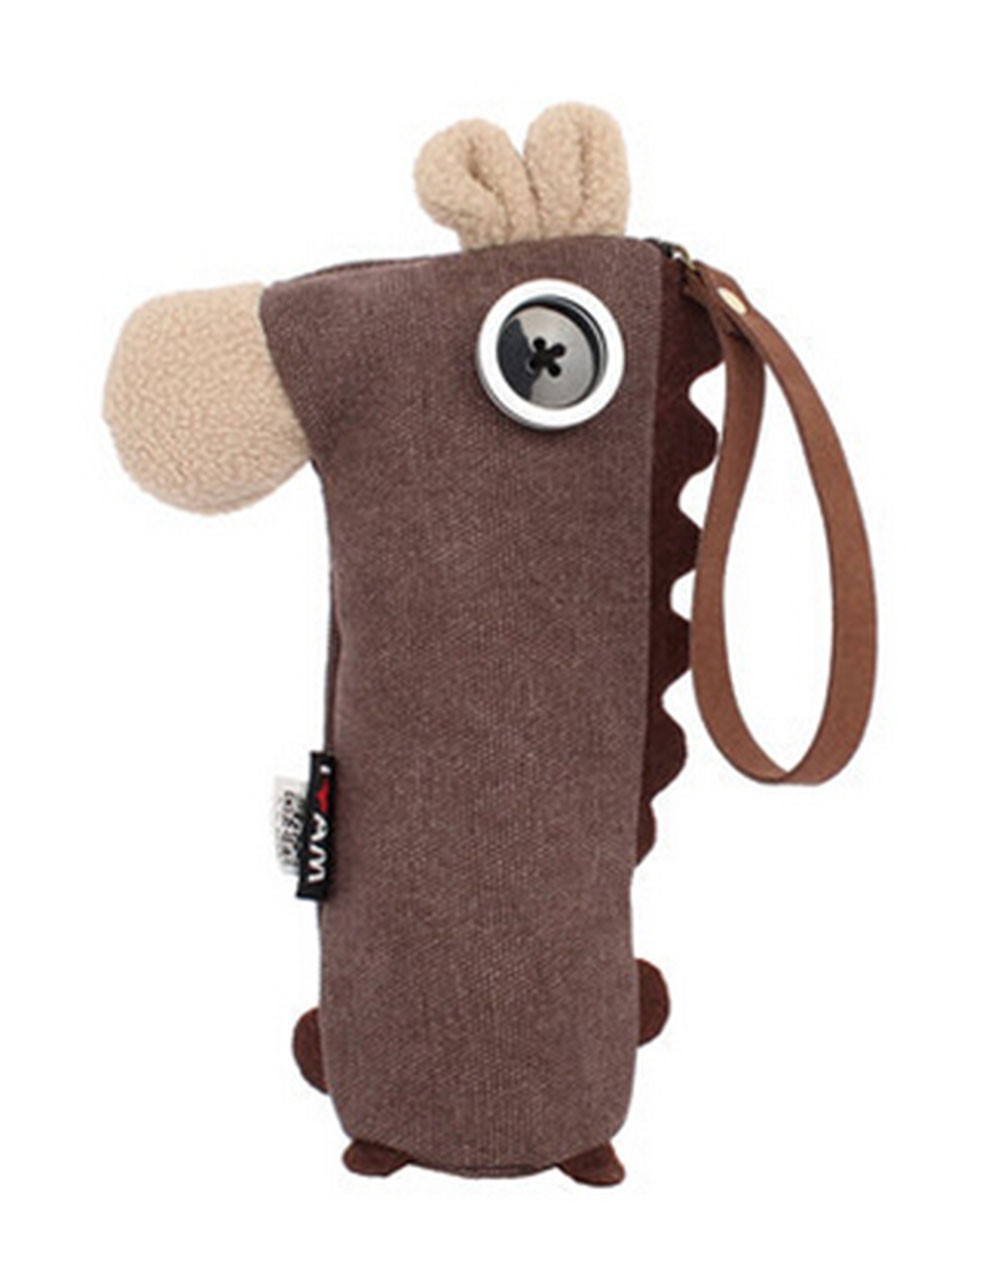 Creative Animal Stationery Bags Large Capacity Pencilcases Canvas Pen Bag, Brown